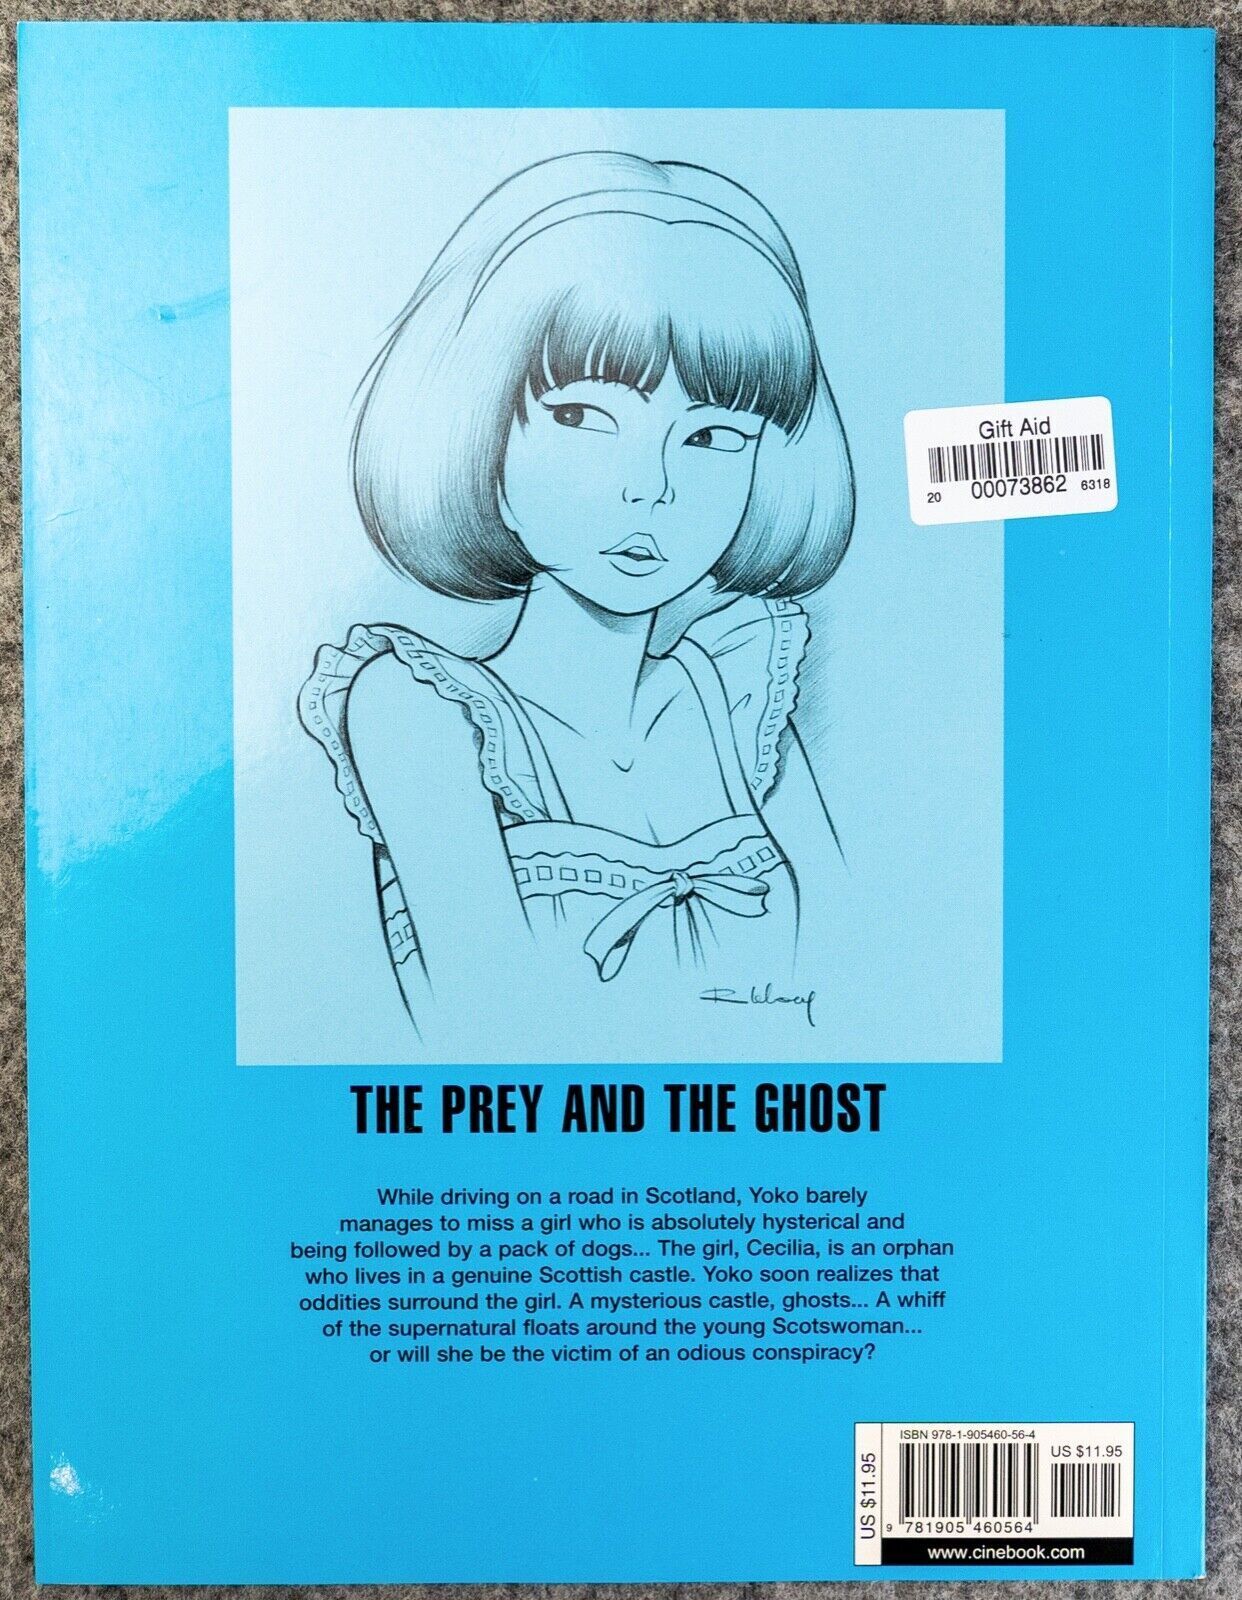 Yoko Tsuno Volume 3 - Prey and The Ghost Cinebook Paperback Comic Book by R. Leloup